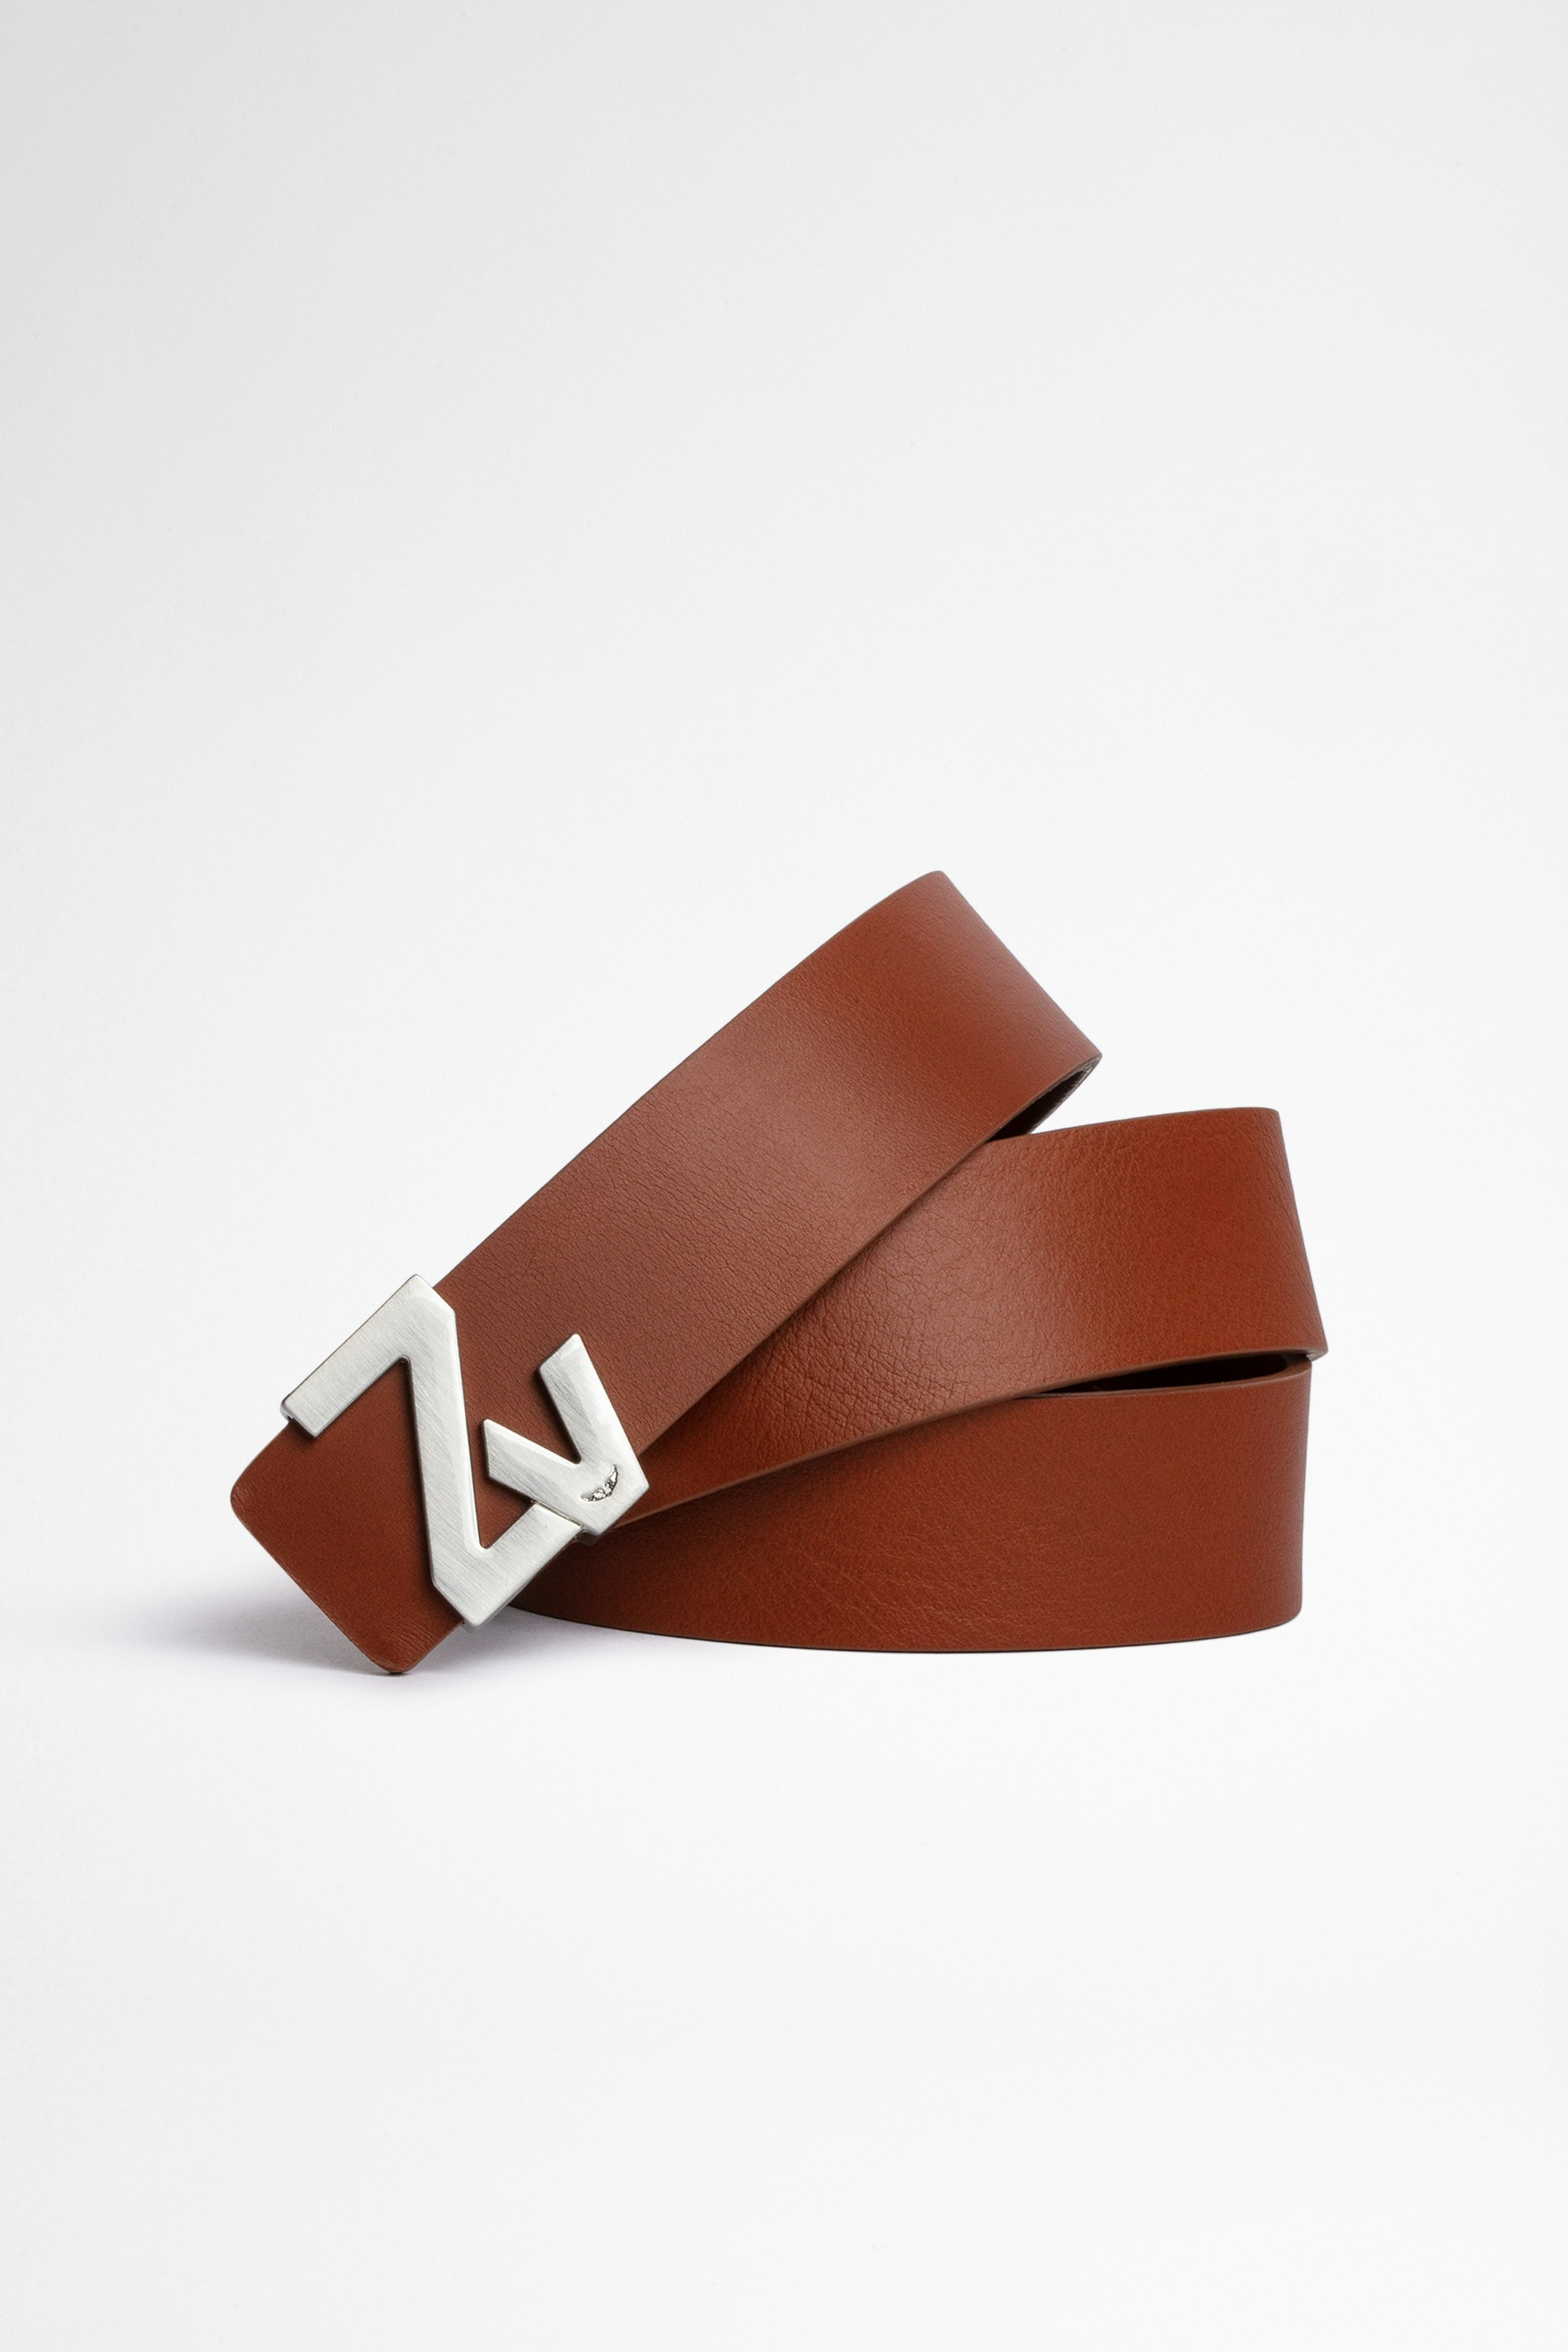 ZV Initiale La ベルト Women's camel-colored leather belt with gold ZV buckle